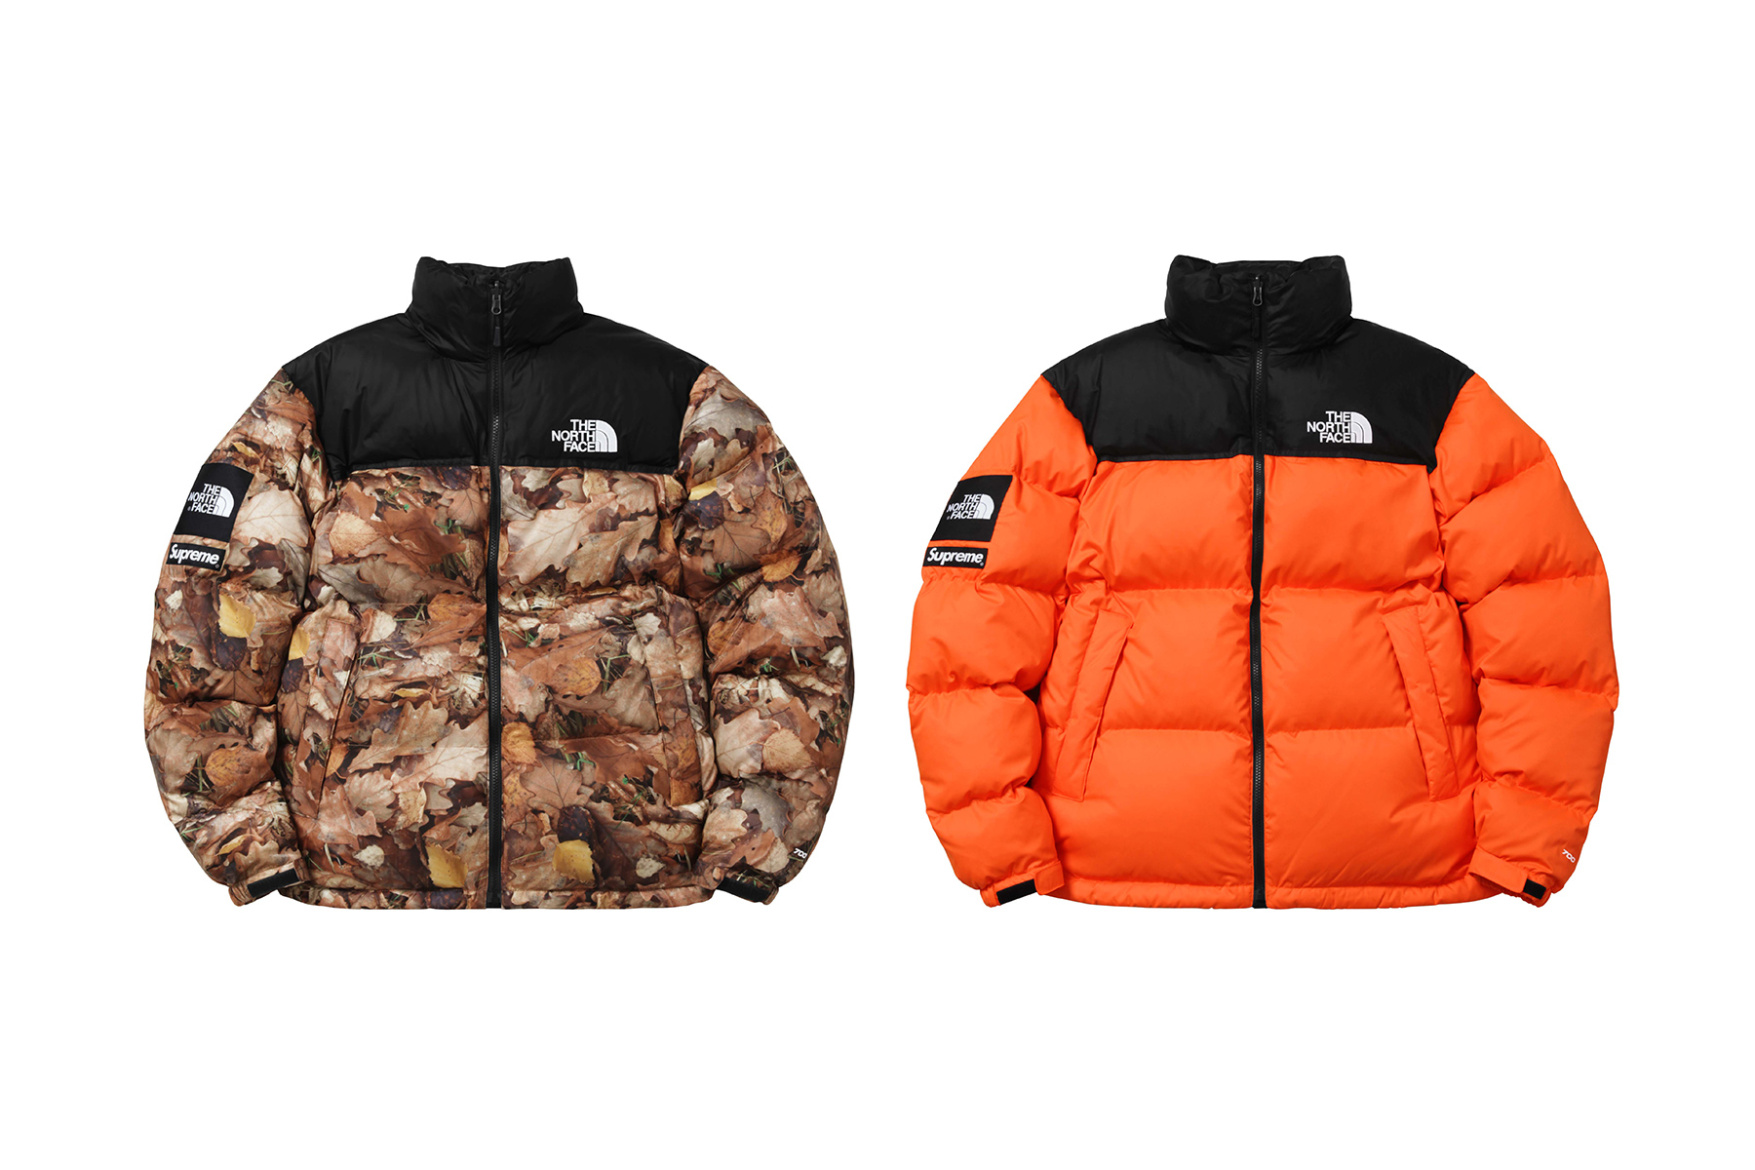 Street Style Shots: Supreme x The North Face FW16 Drop – Part 2